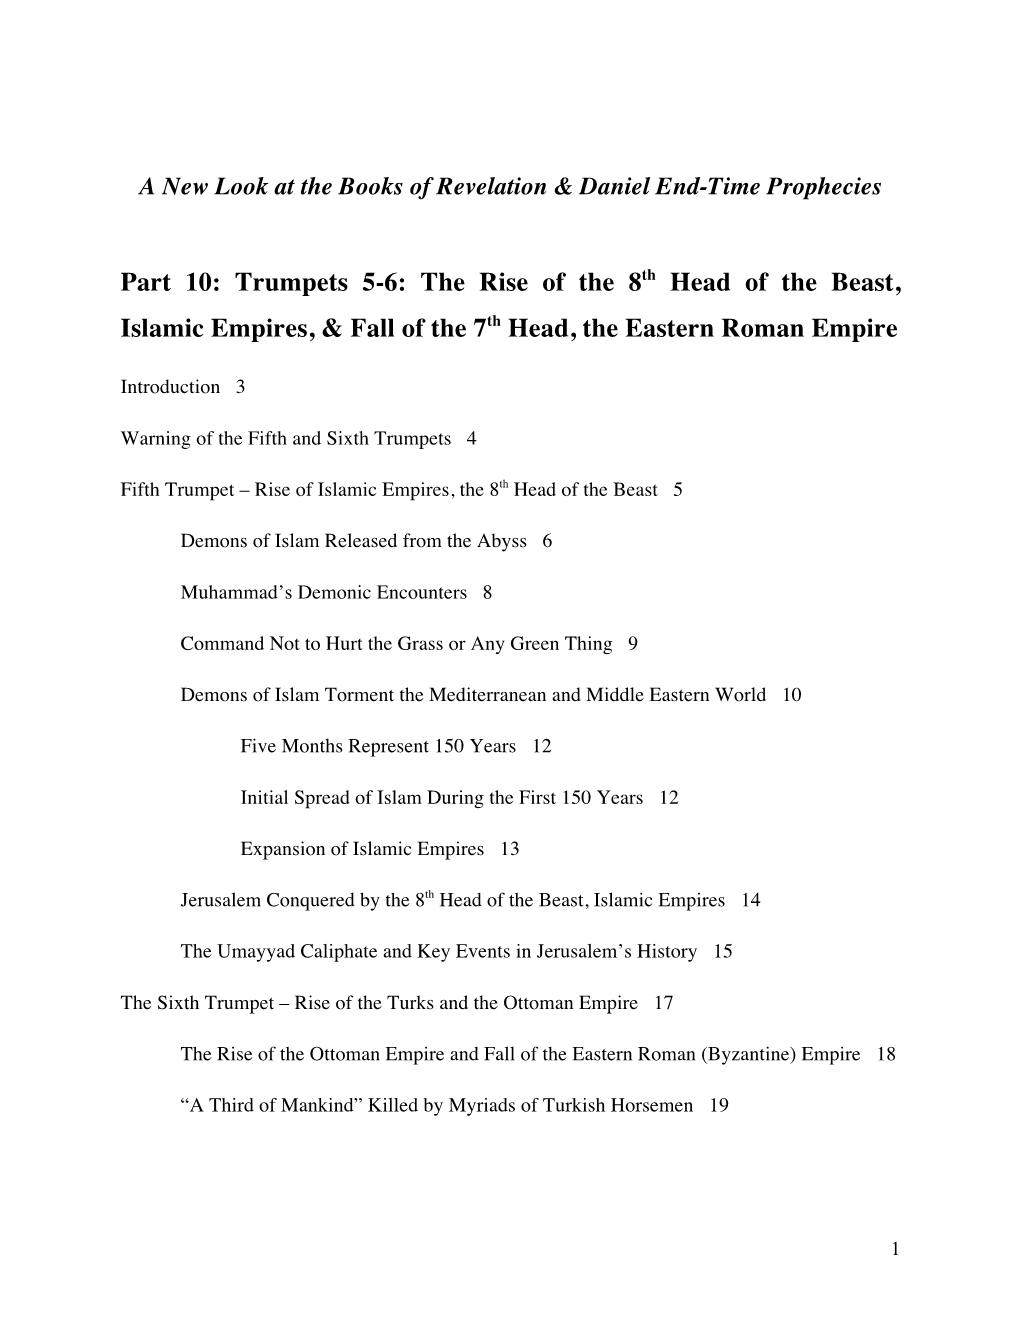 Trumpets 5-6: the Rise of the 8Th Head of the Beast, Islamic Empires, & Fall of the 7Th Head, the Eastern Roman Empire